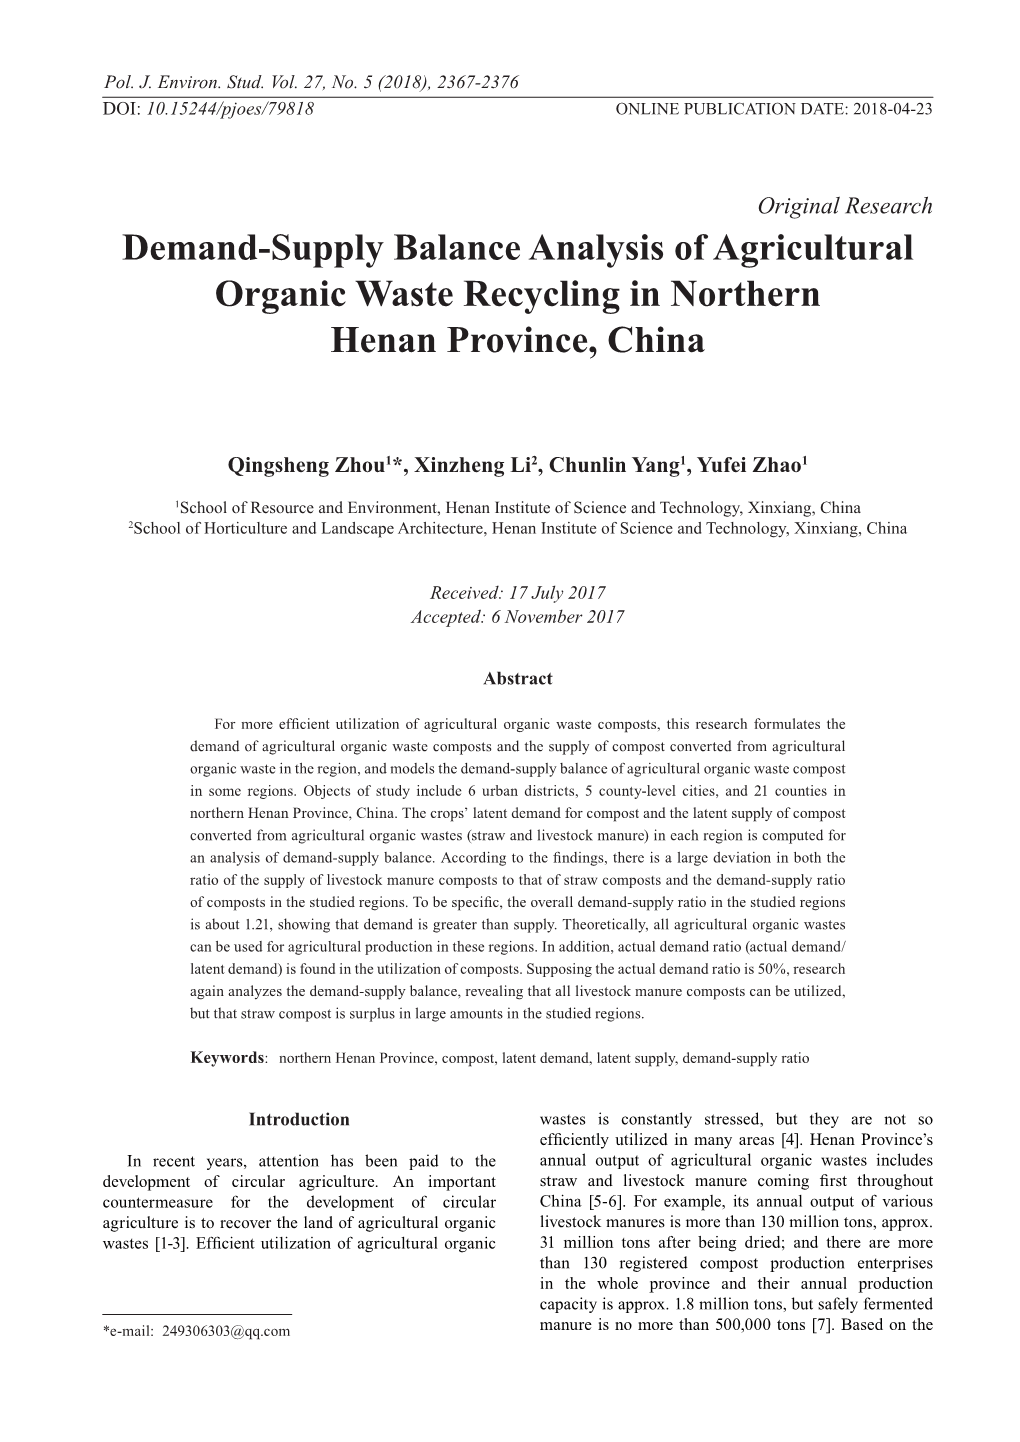 Demand-Supply Balance Analysis of Agricultural Organic Waste Recycling in Northern Henan Province, China